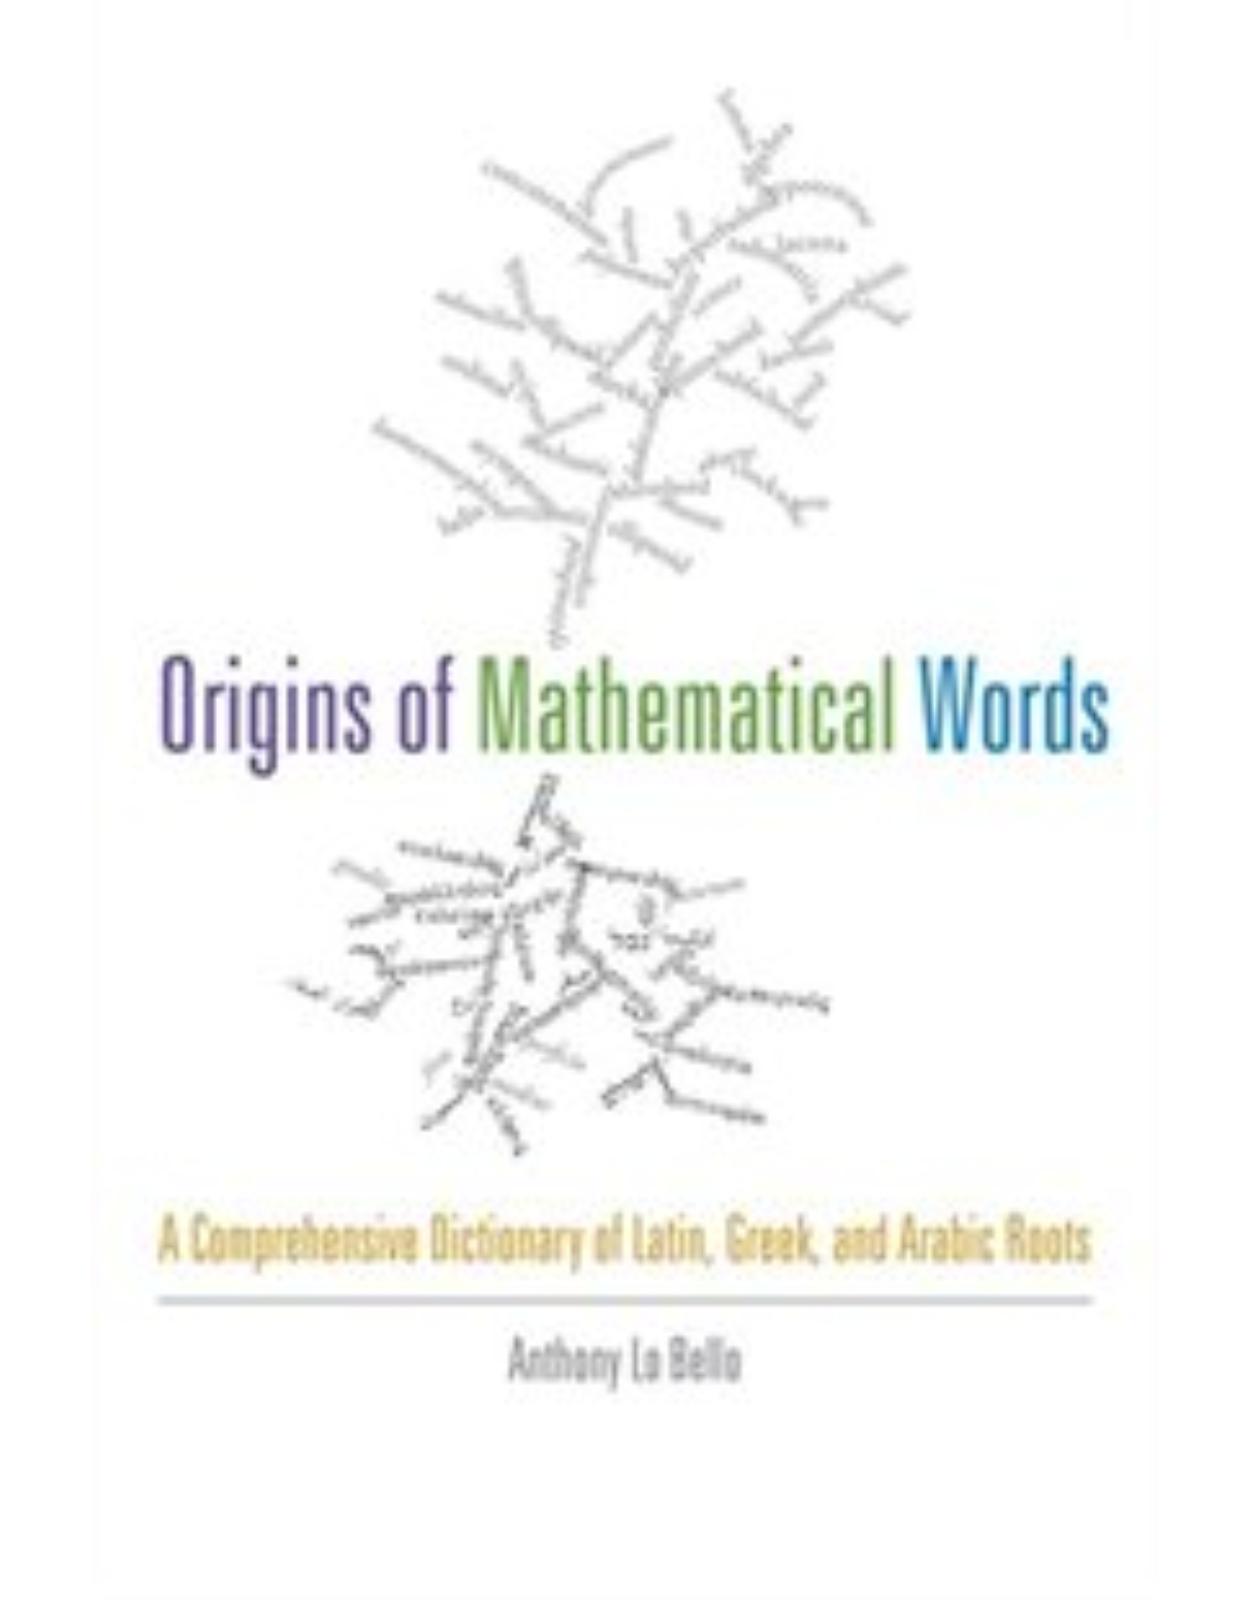 Origins of Mathematical Words. A Comprehensive Dictionary of Latin, Greek, and Arabic Roots